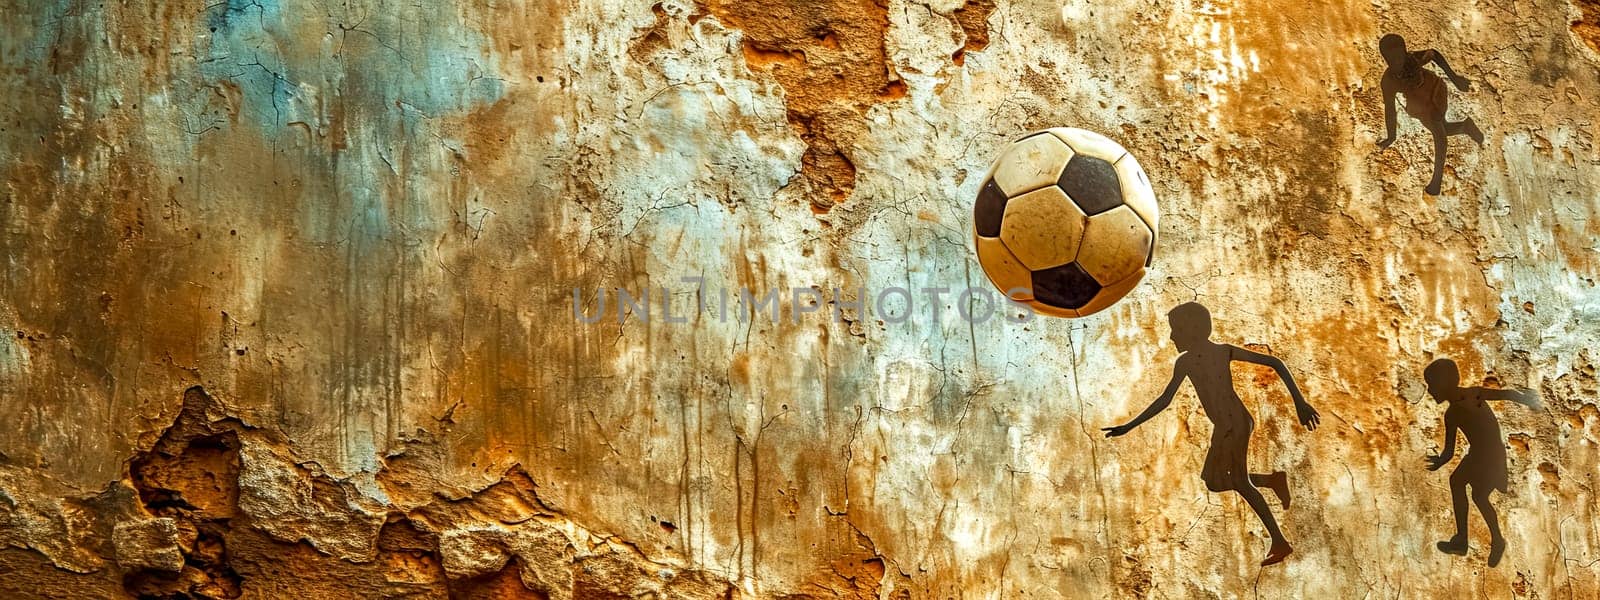 soccer play with silhouetted players and a ball against a rustic, aged wall, merging sports with a vintage aesthetic. copy space